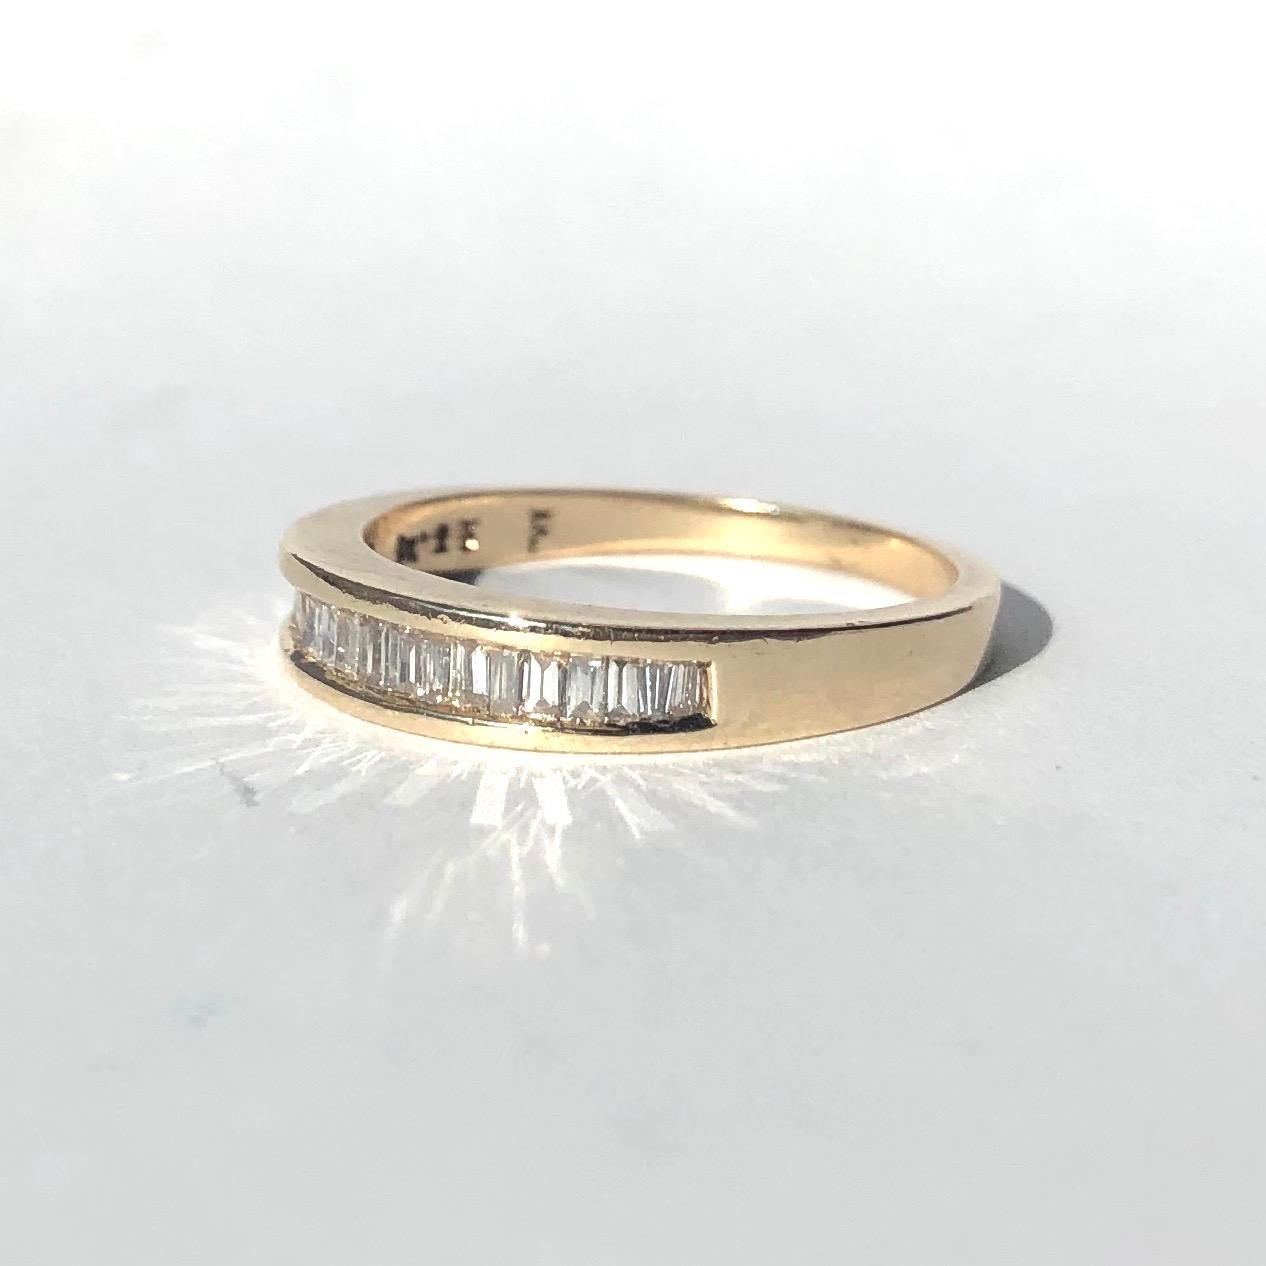 This stunning baguette diamond and 9ct gold band has a gorgeous reflective sparkle. The baguette diamonds are tapered and perfectly slotted together which make the line of diamonds sparkle even more. The diamonds range from 4pts to 8pts. Made in